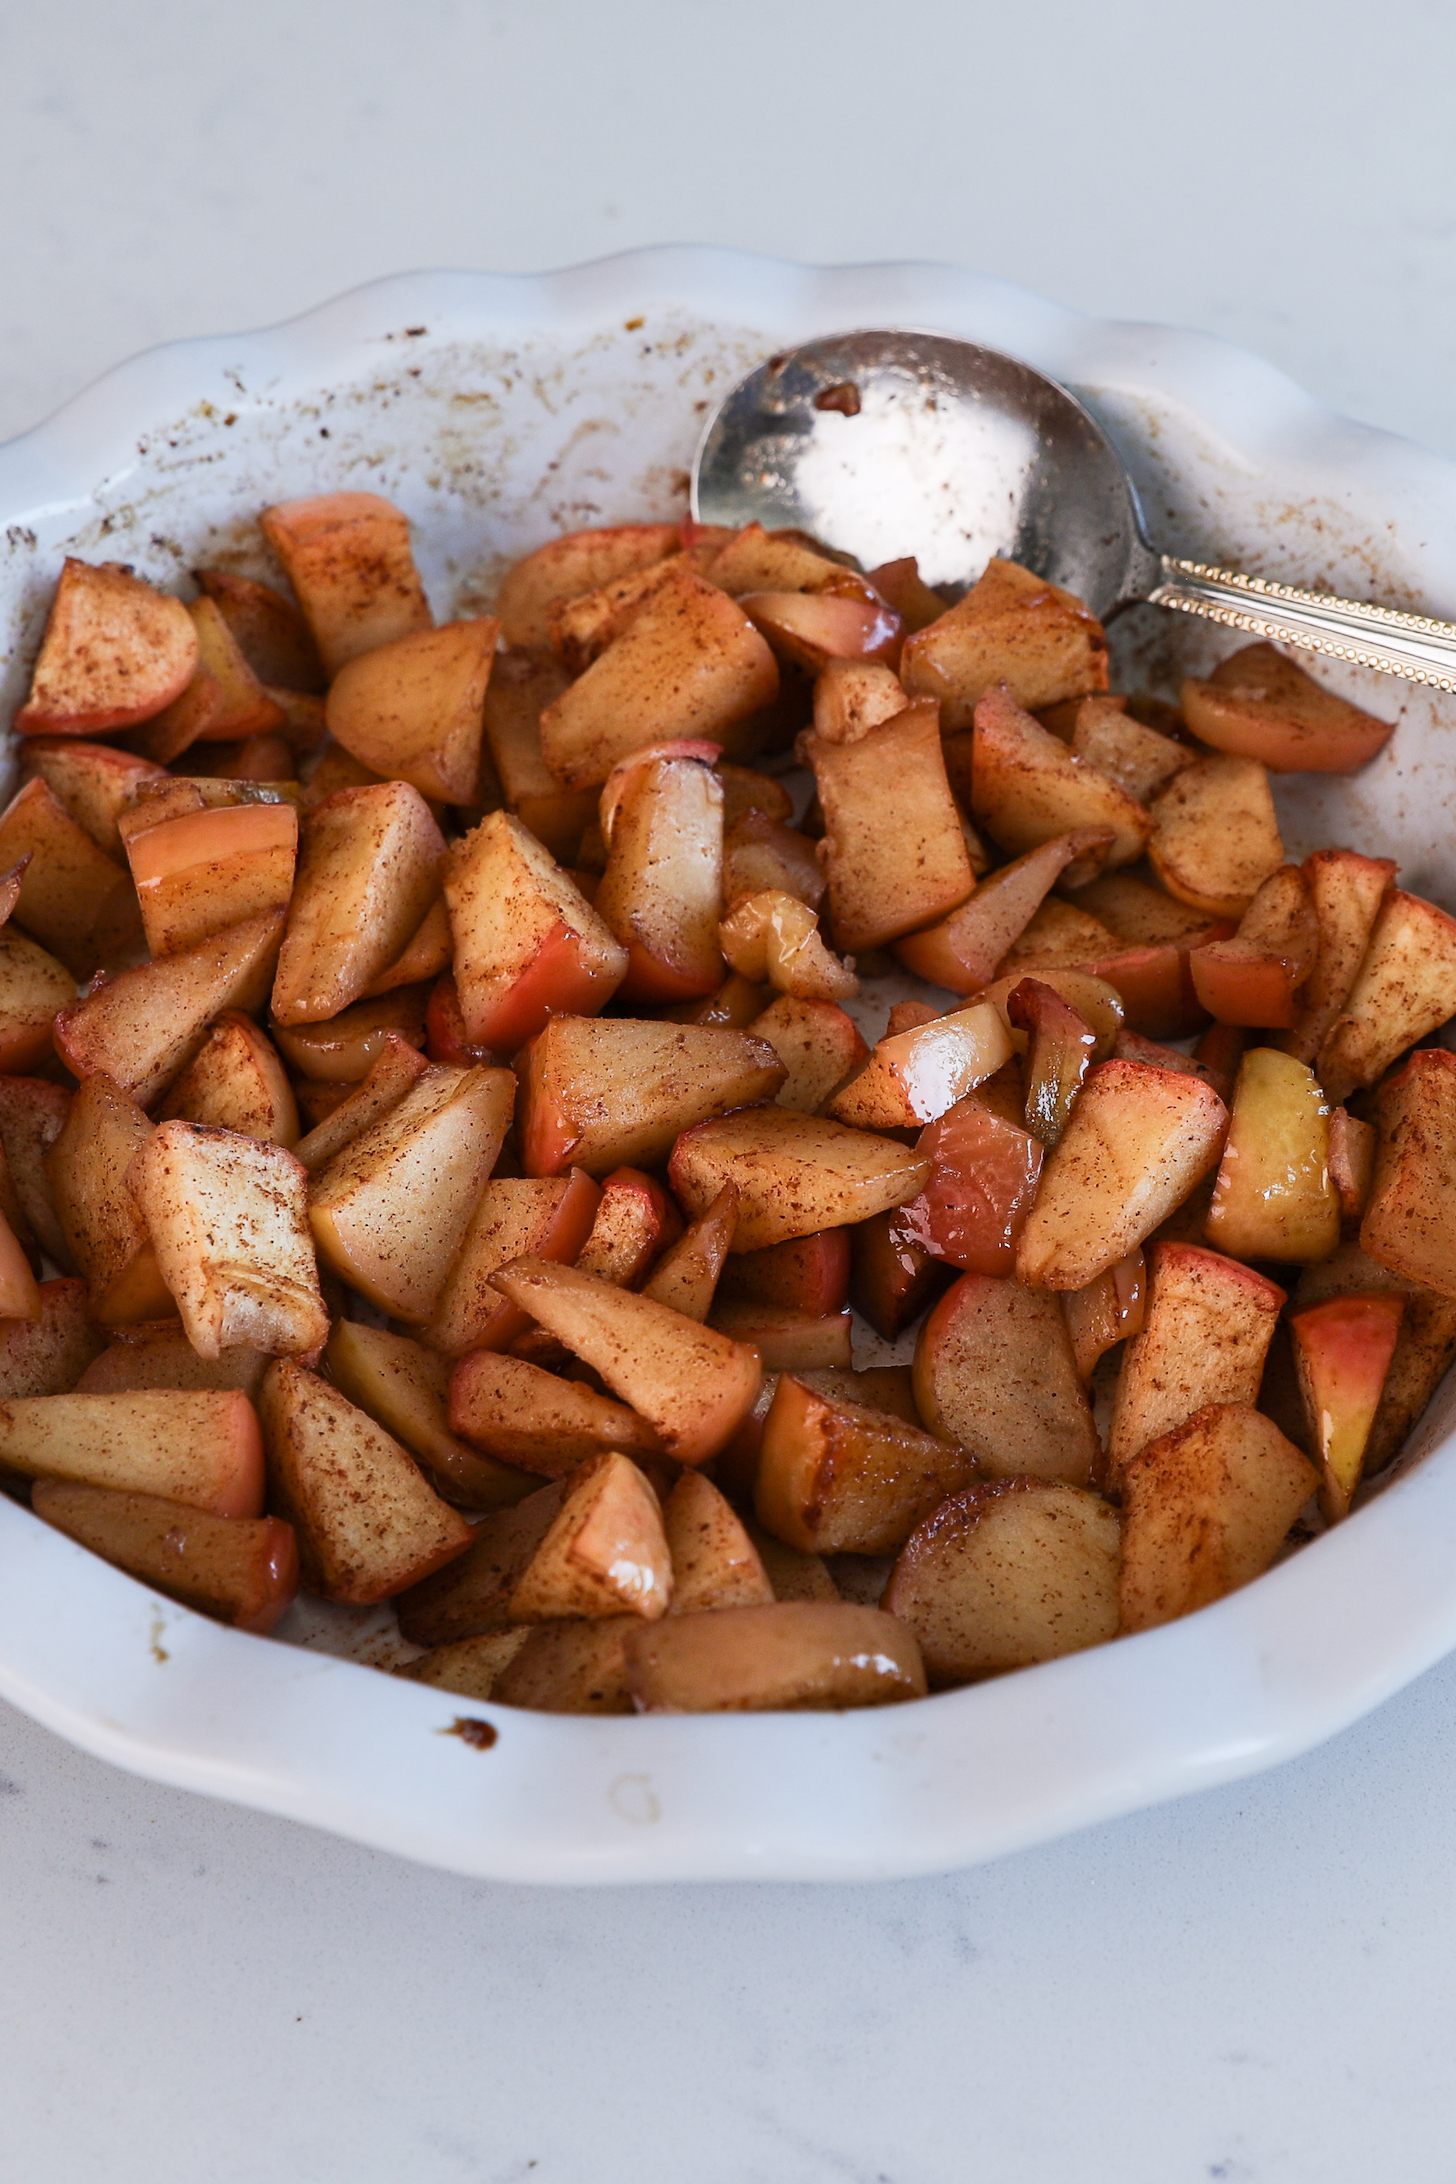 Oven dish with spice-coated baked apple slices and a spoon.